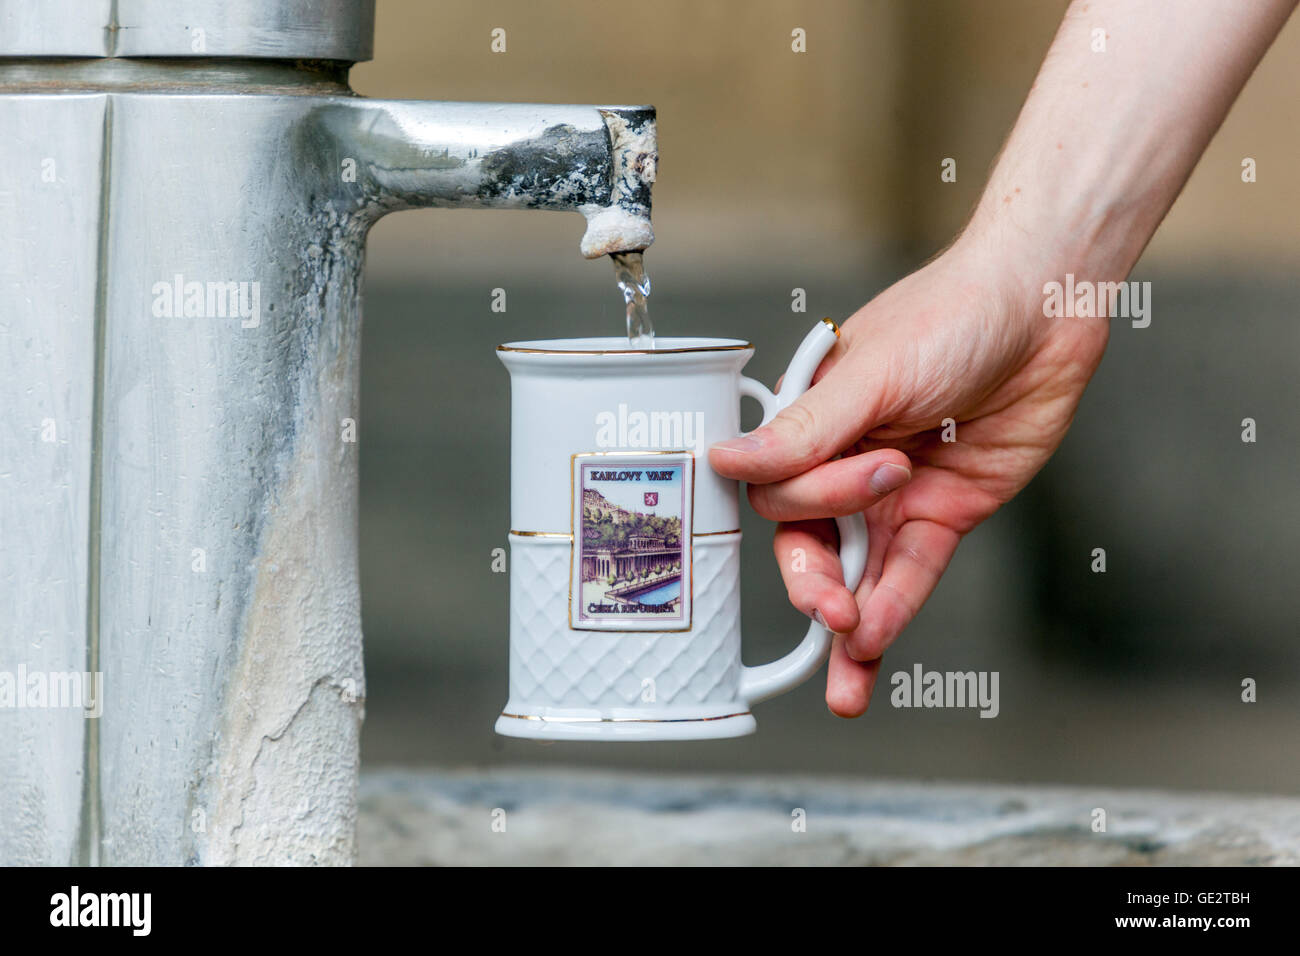 Spa cup for mineral water, Karlovy Vary spa town, West Bohemia, Czech Republic Stock Photo